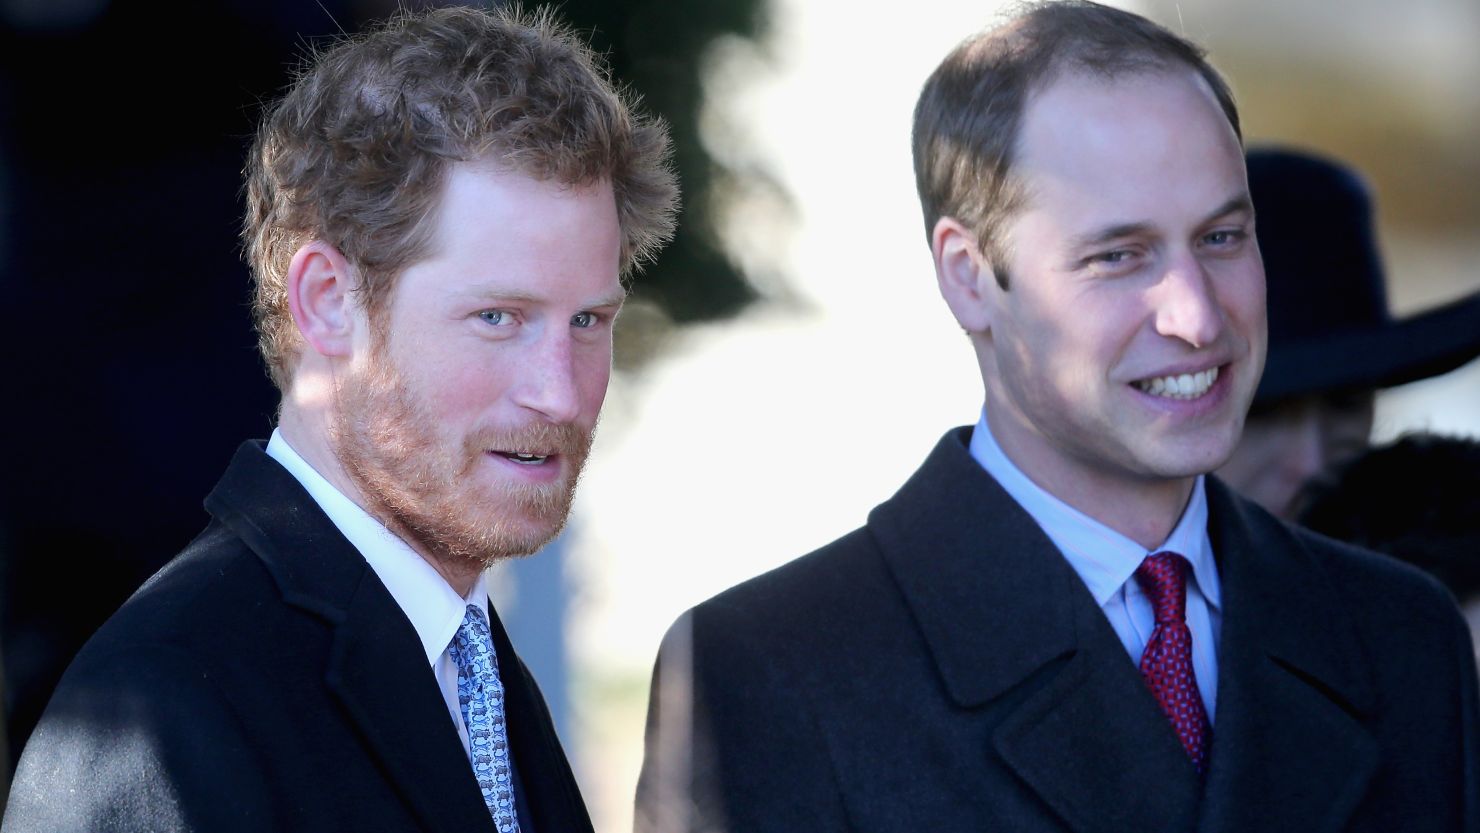 Prince Harry, left, and Prince William leave the Christmas Day service at Sandringham on December 25 in King's Lynn.